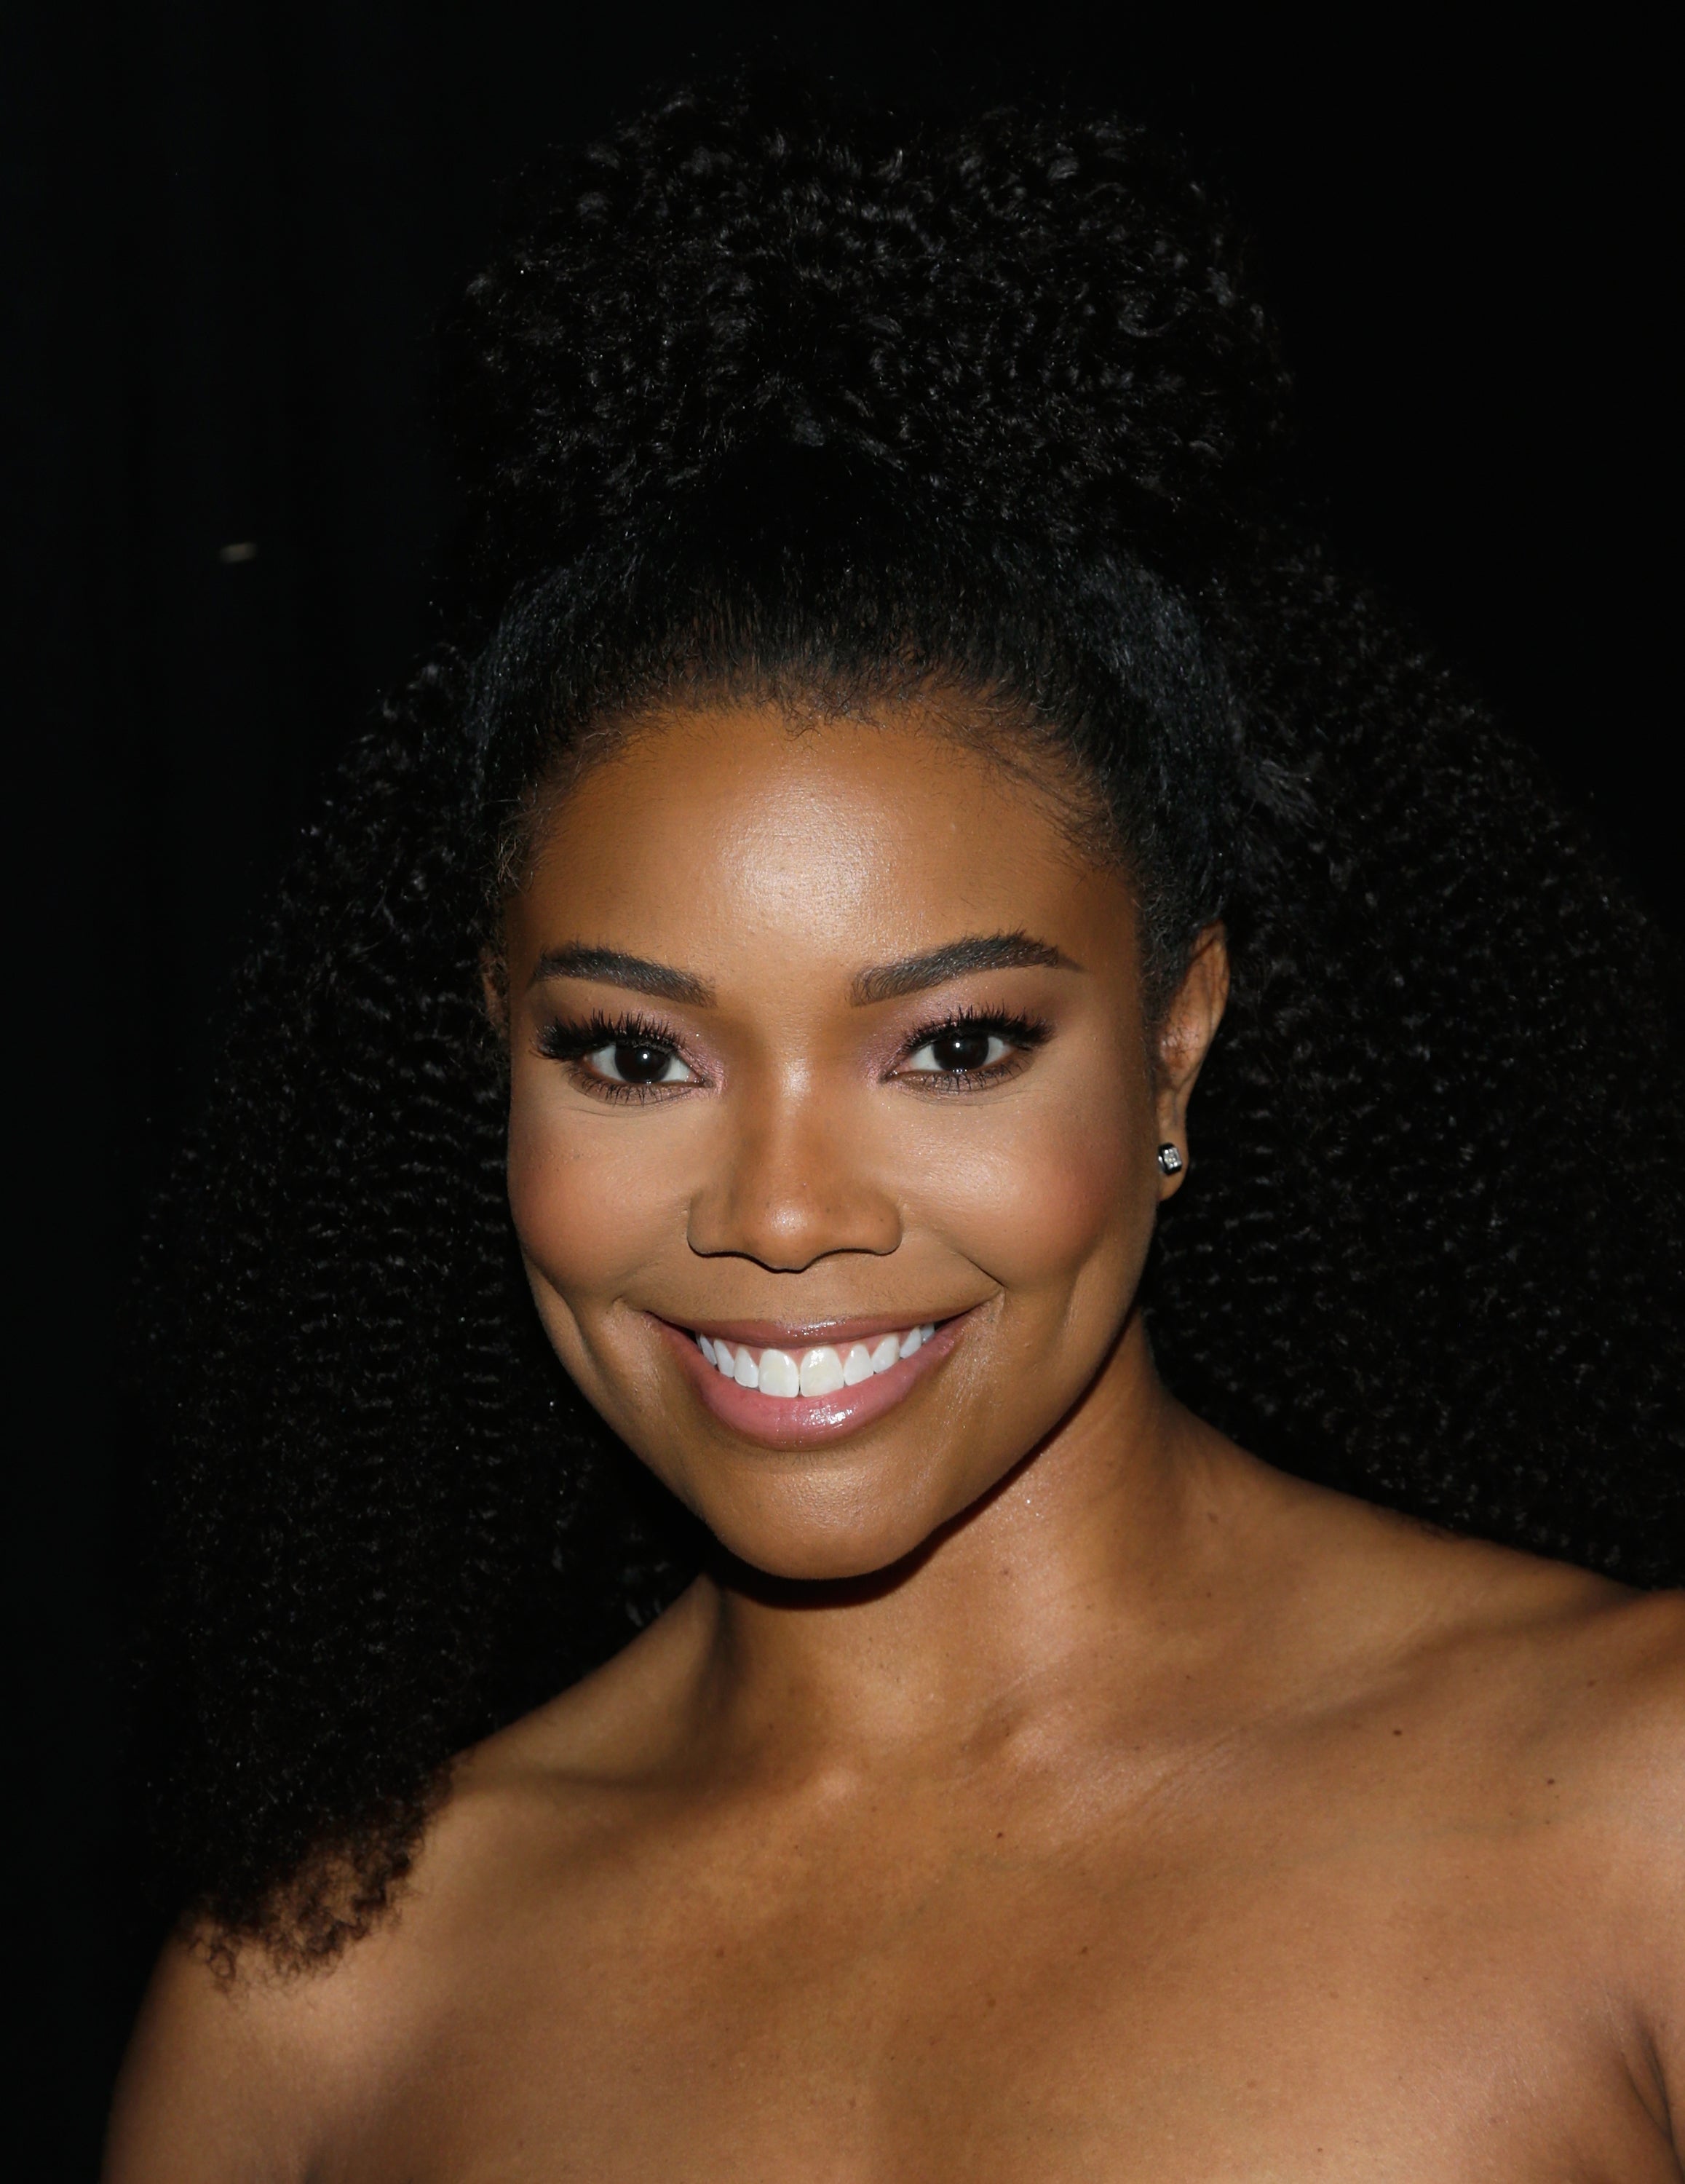 Gabrielle Union's Workout Will Give You Toned, Tight Arms
